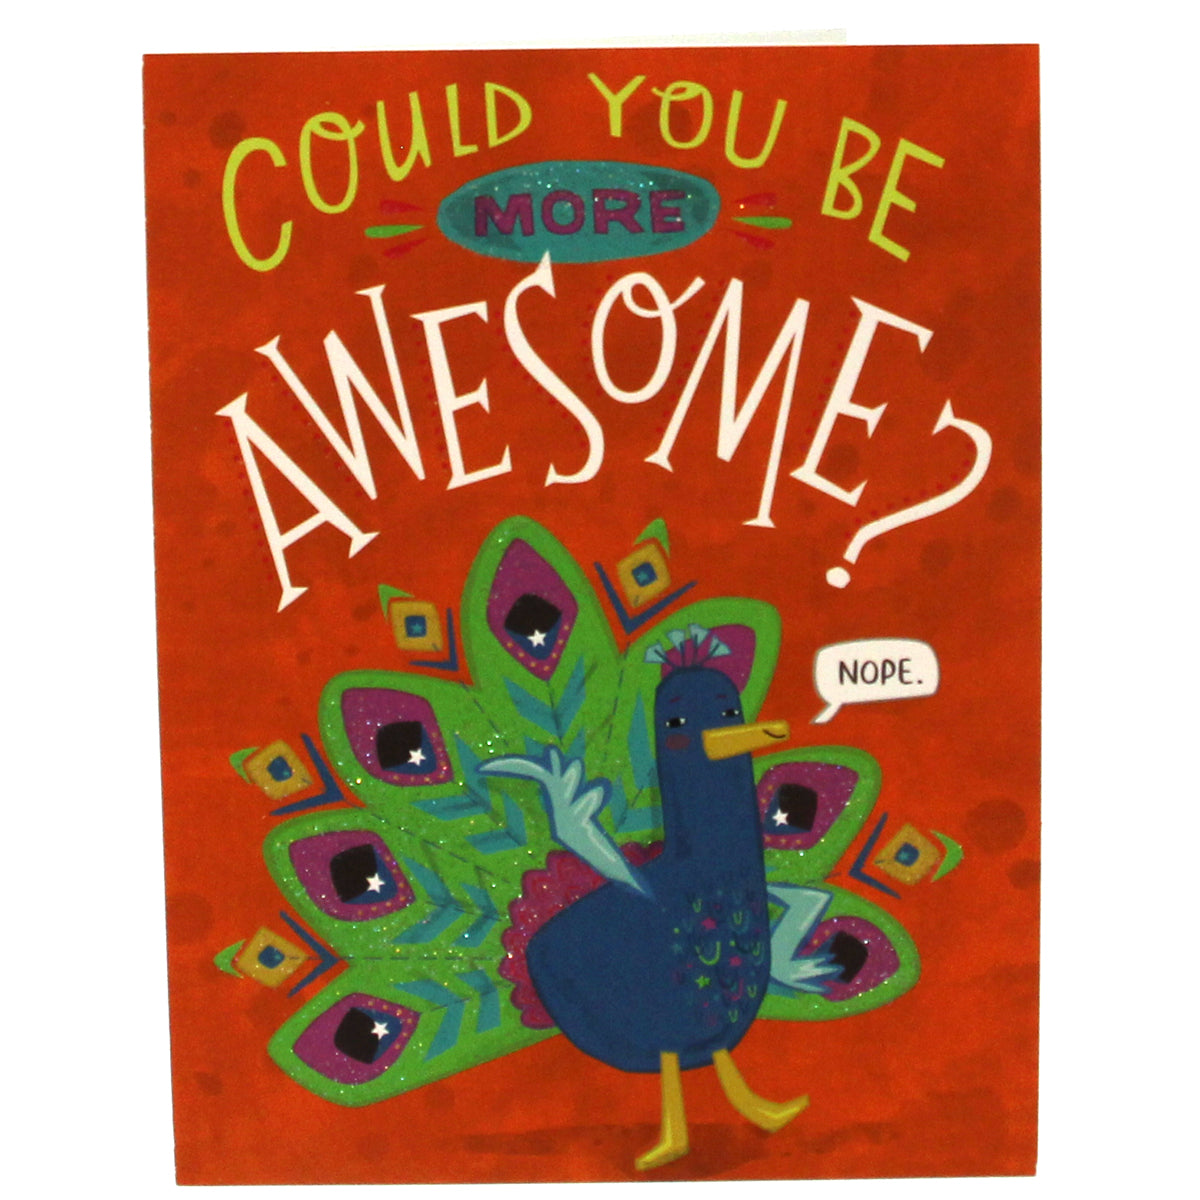 Friendship Notions Card: Could you be more awesome? (image of a peacock)